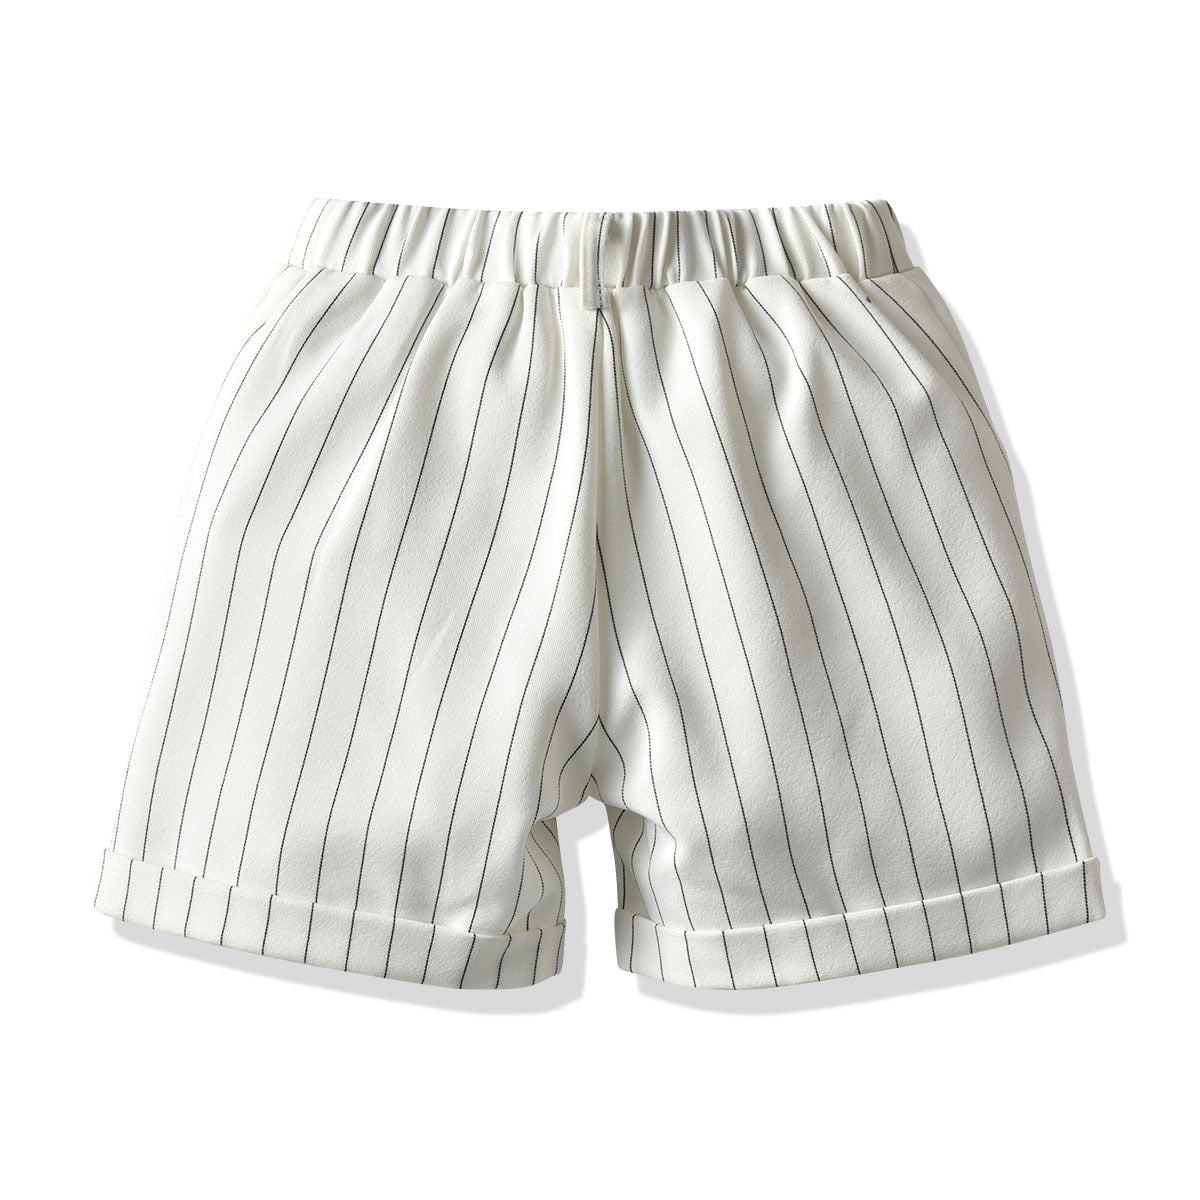 Kids striped pants with suspenders